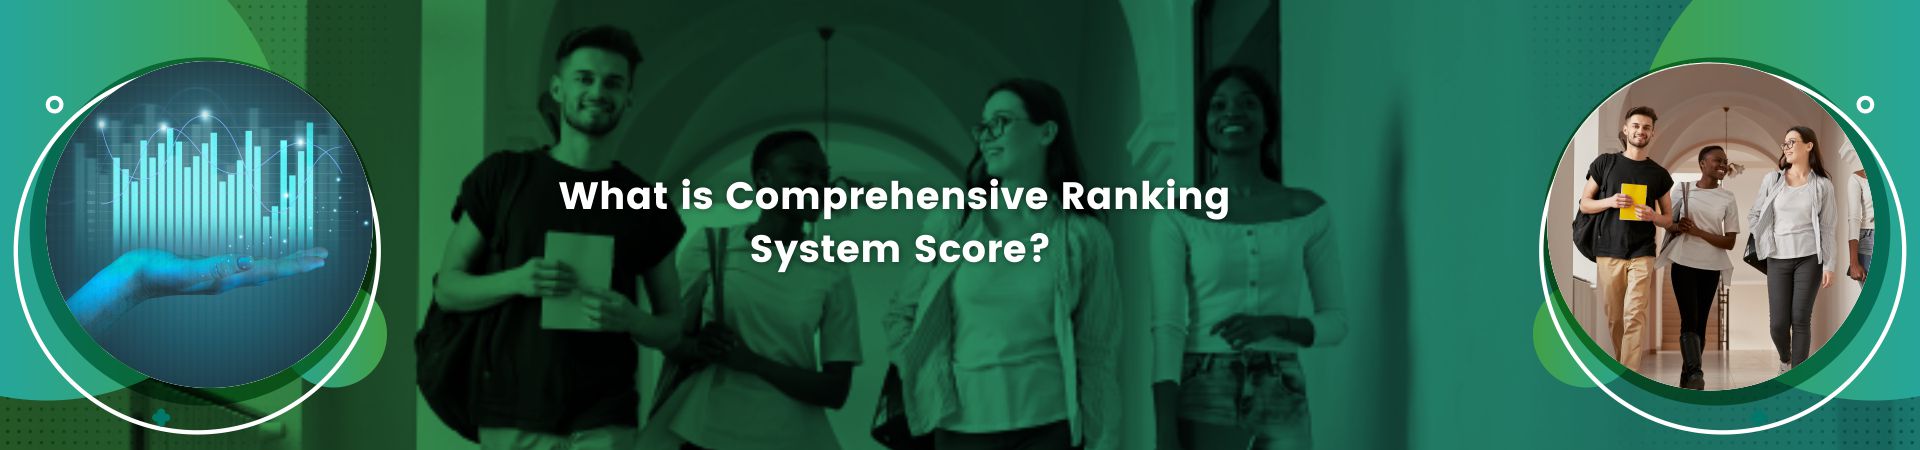 What is Comprehensive Ranking System Score?